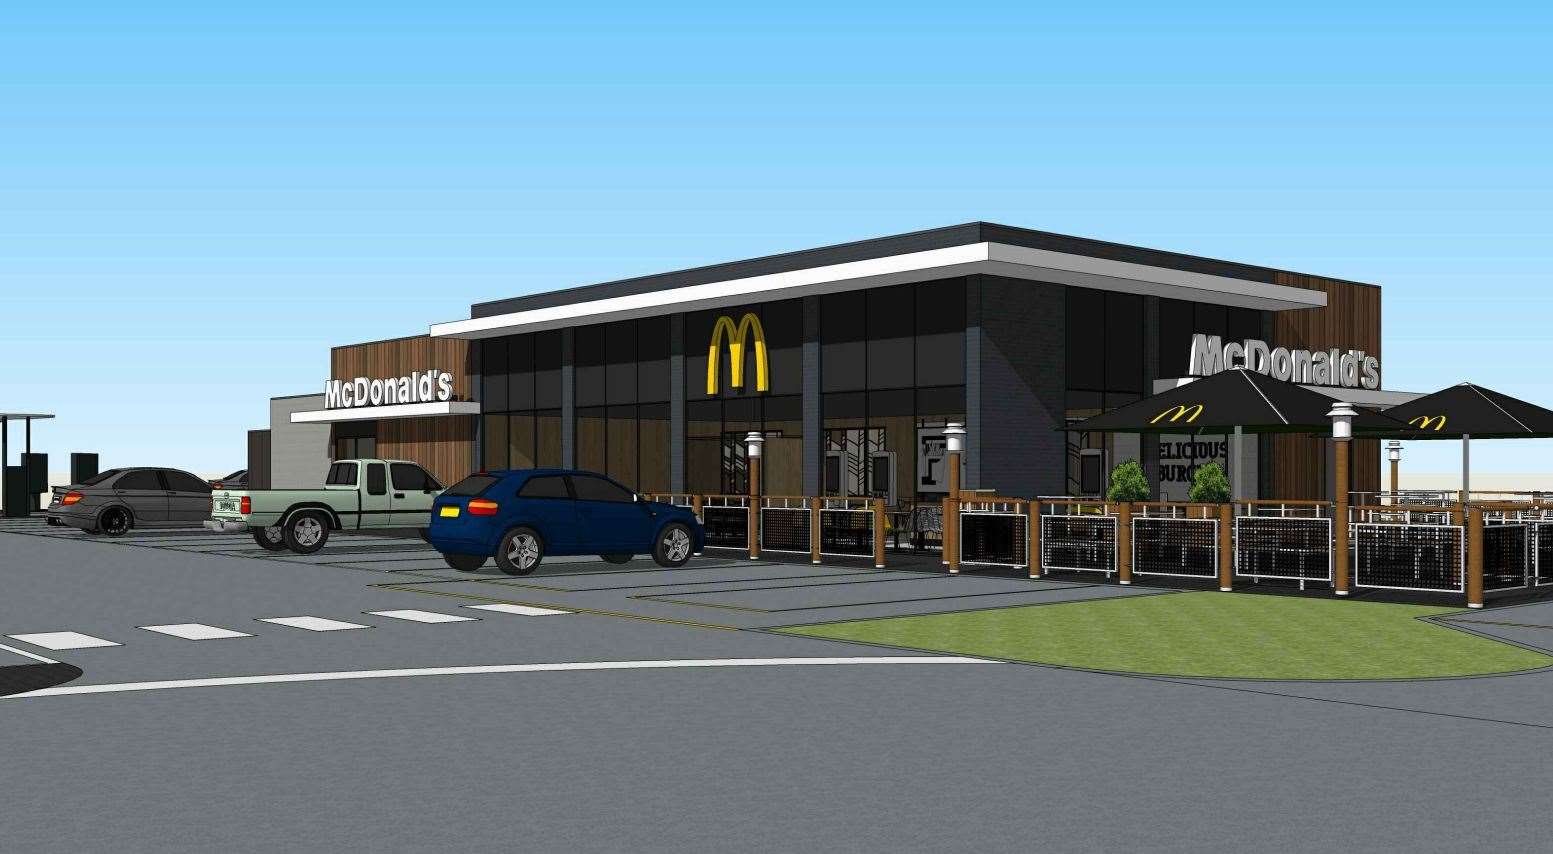 Plans for a drive-thru McDonald’s were approved for land off Chart Road last year